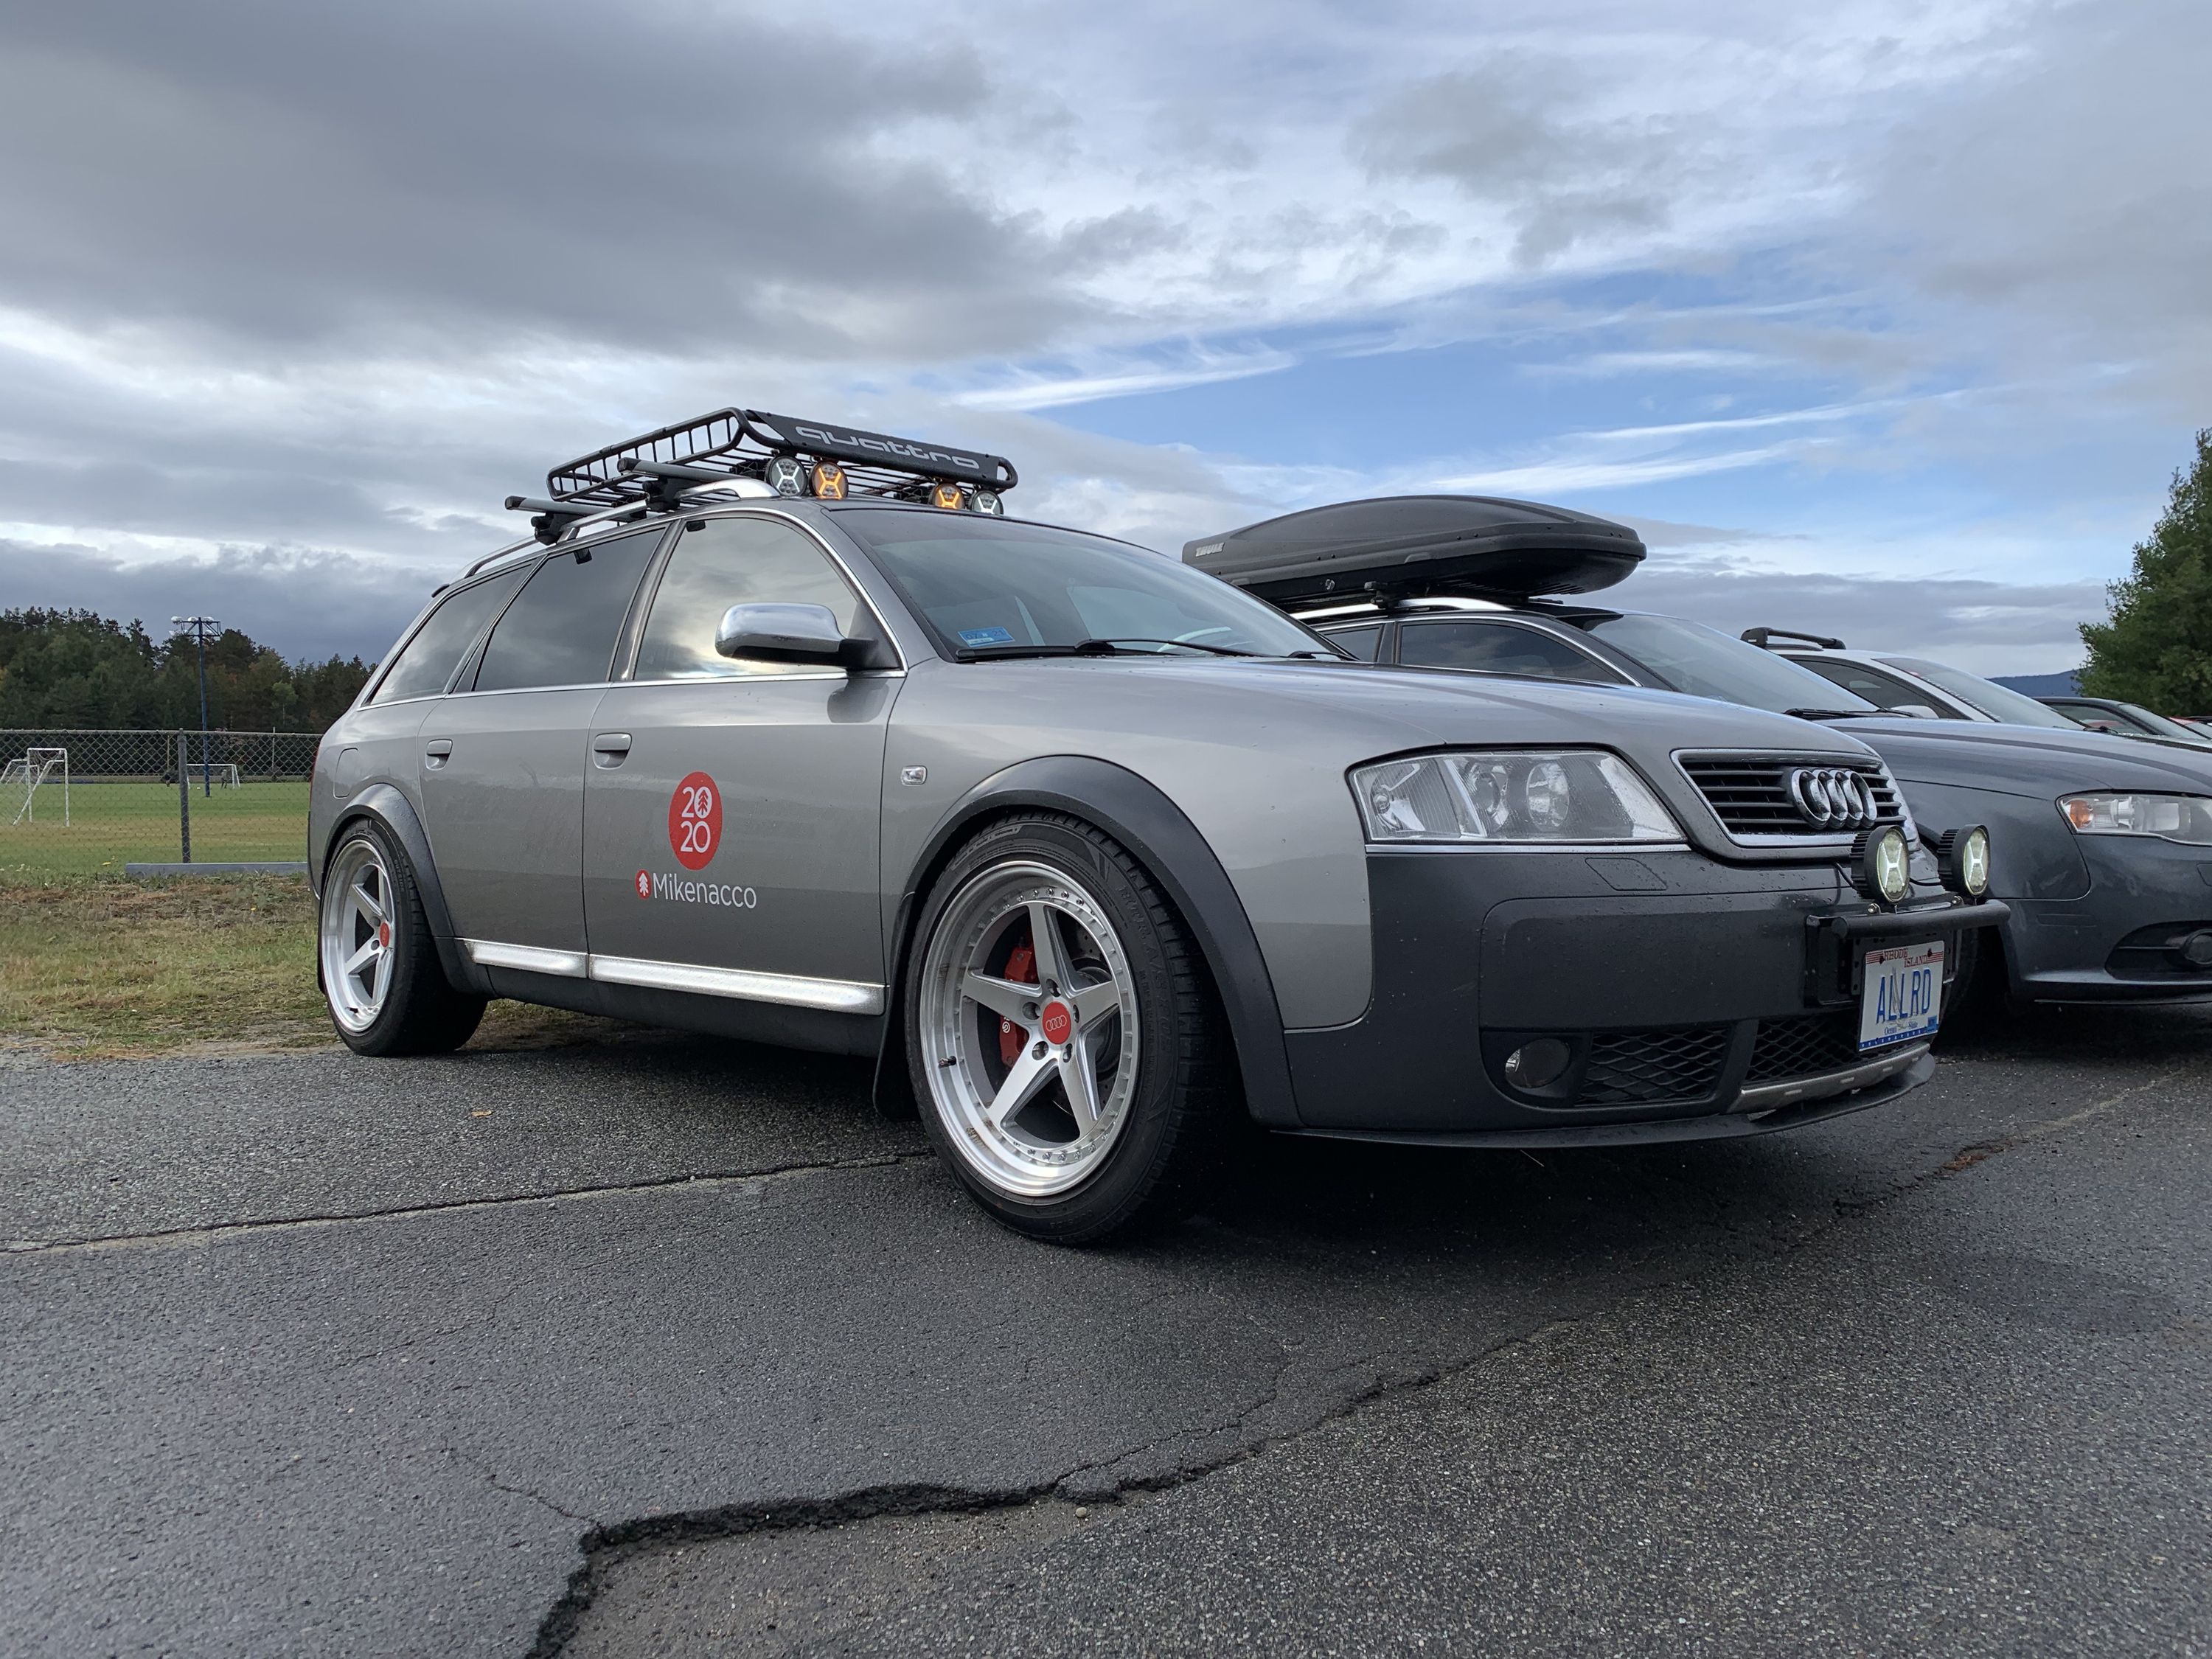 Audi A6 Allroad Pros and Cons Review: Bringing a Wagon to an SUV Party